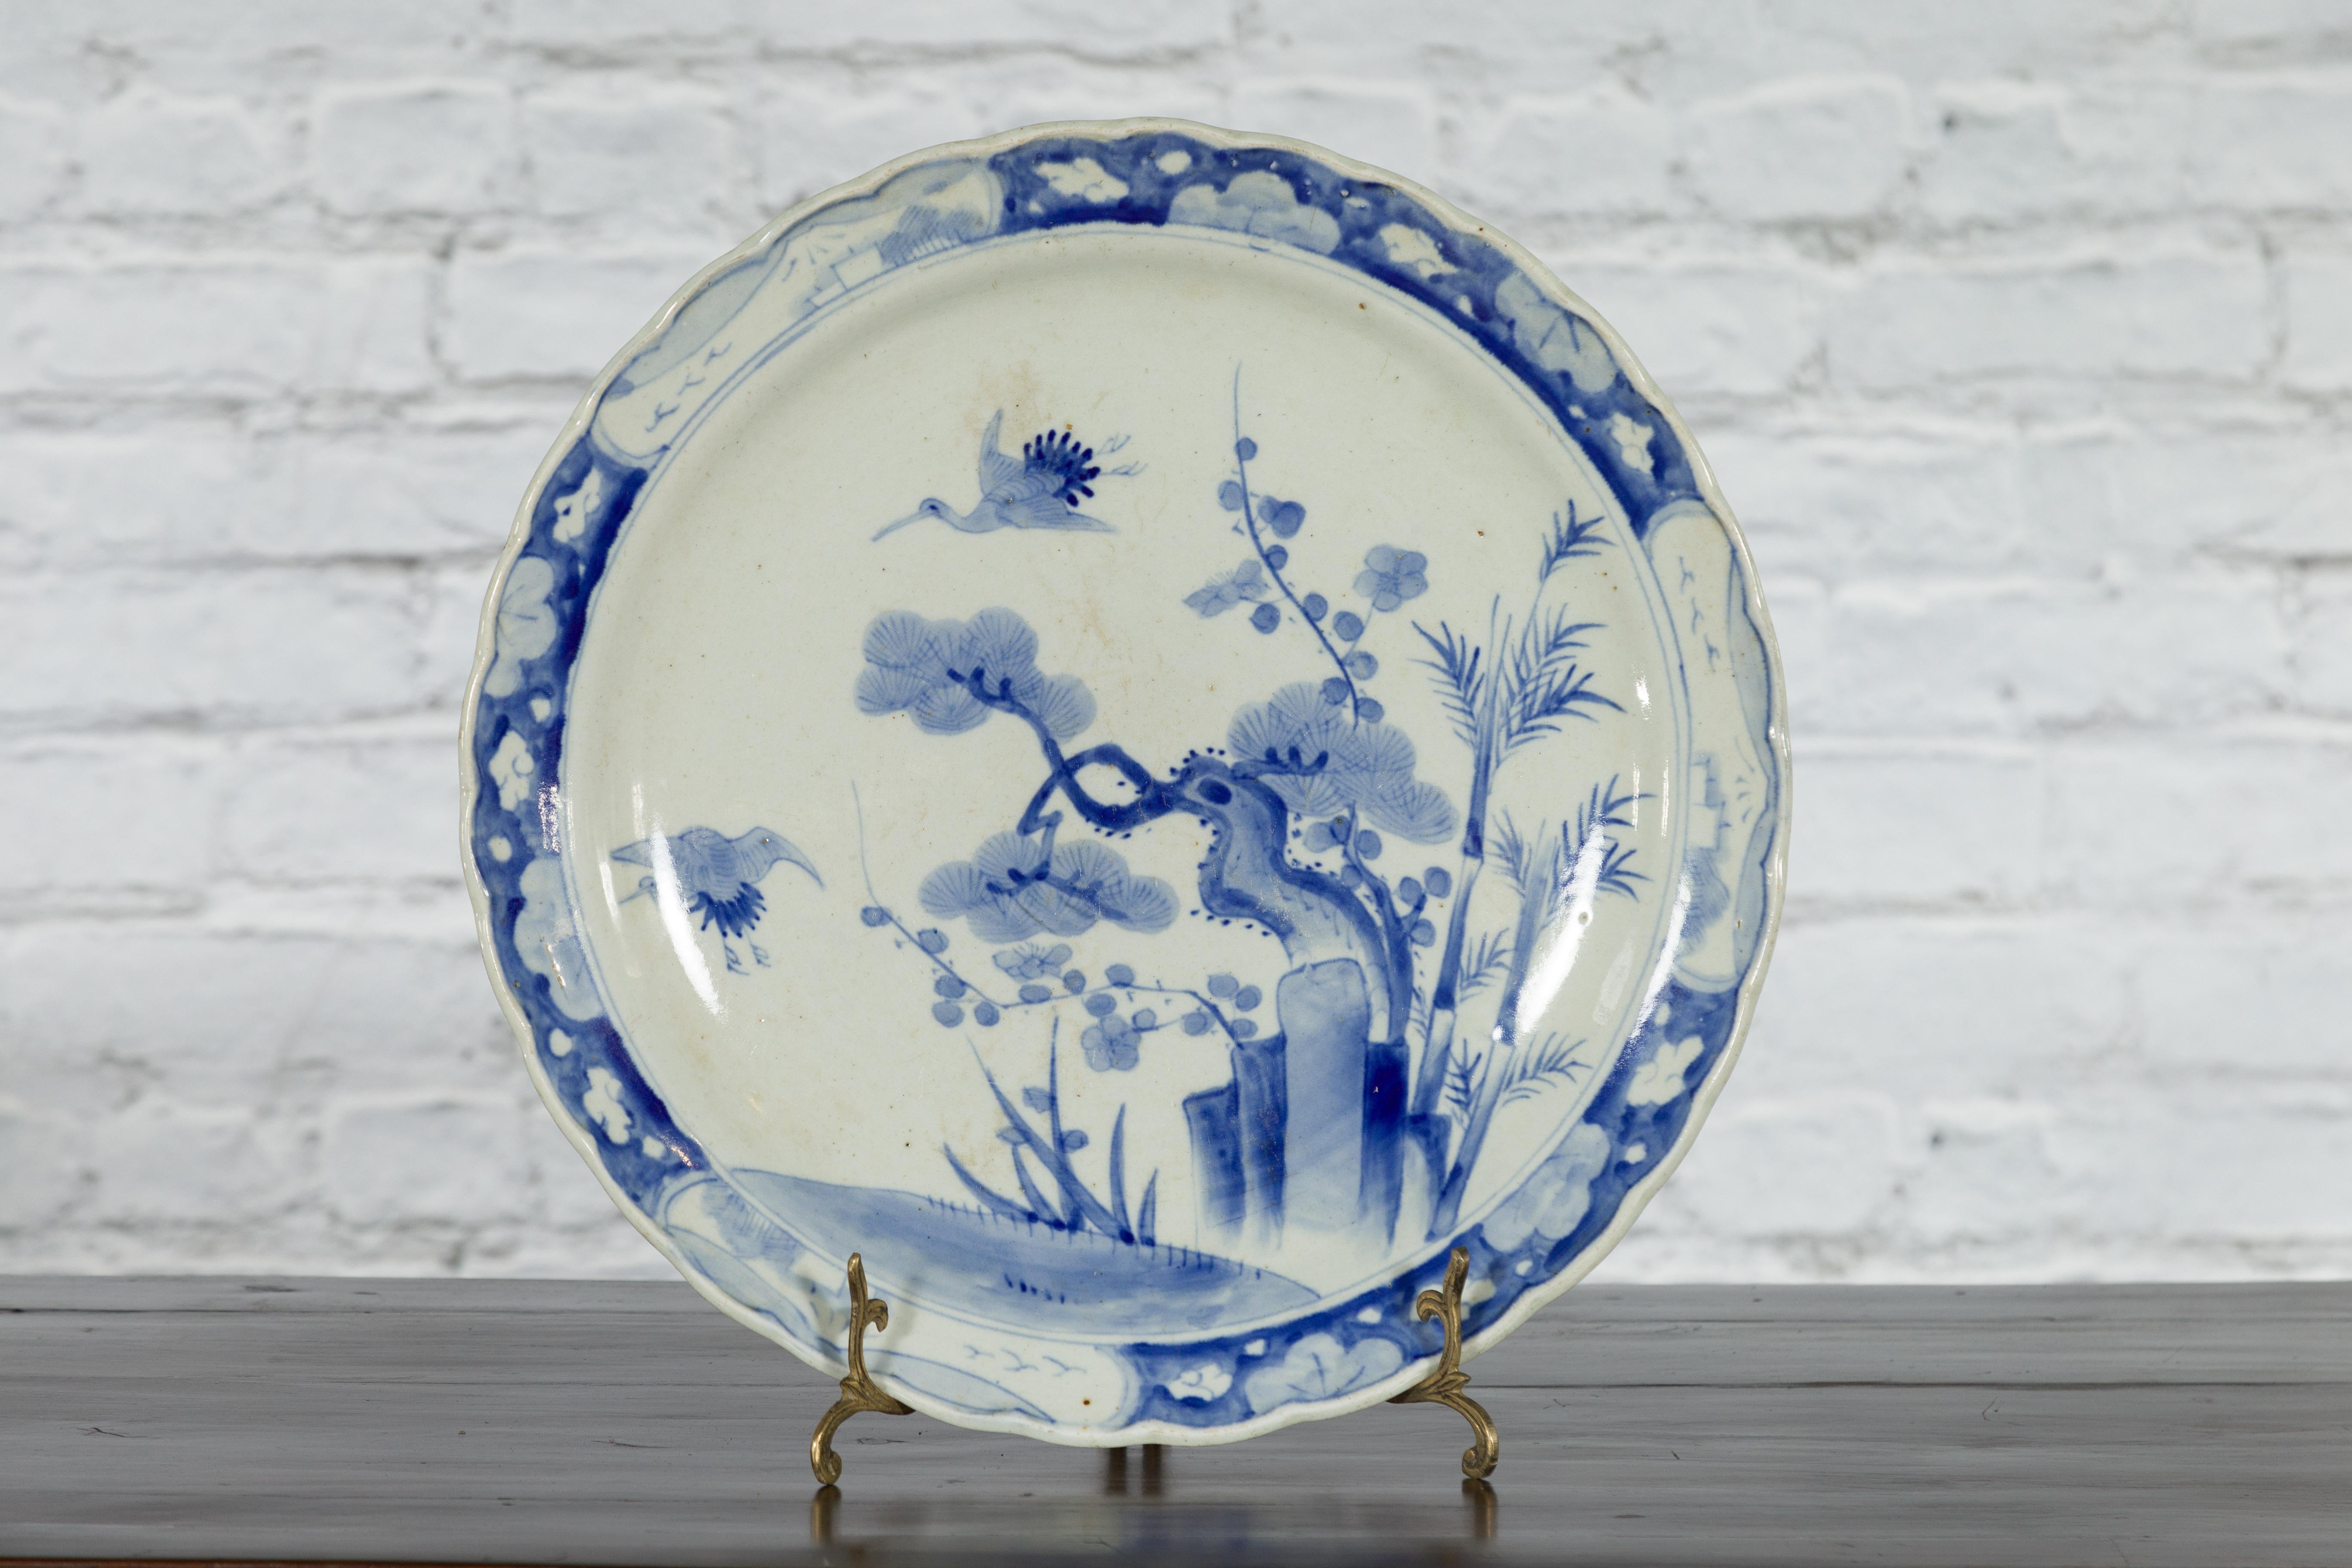 A Japanese porcelain charger plate from the 19th century, with hand-painted blue and white blooming tree, rocky formation and bird décor. Created in Japan during the 19th century, this porcelain plate features a delicate blue and white décor